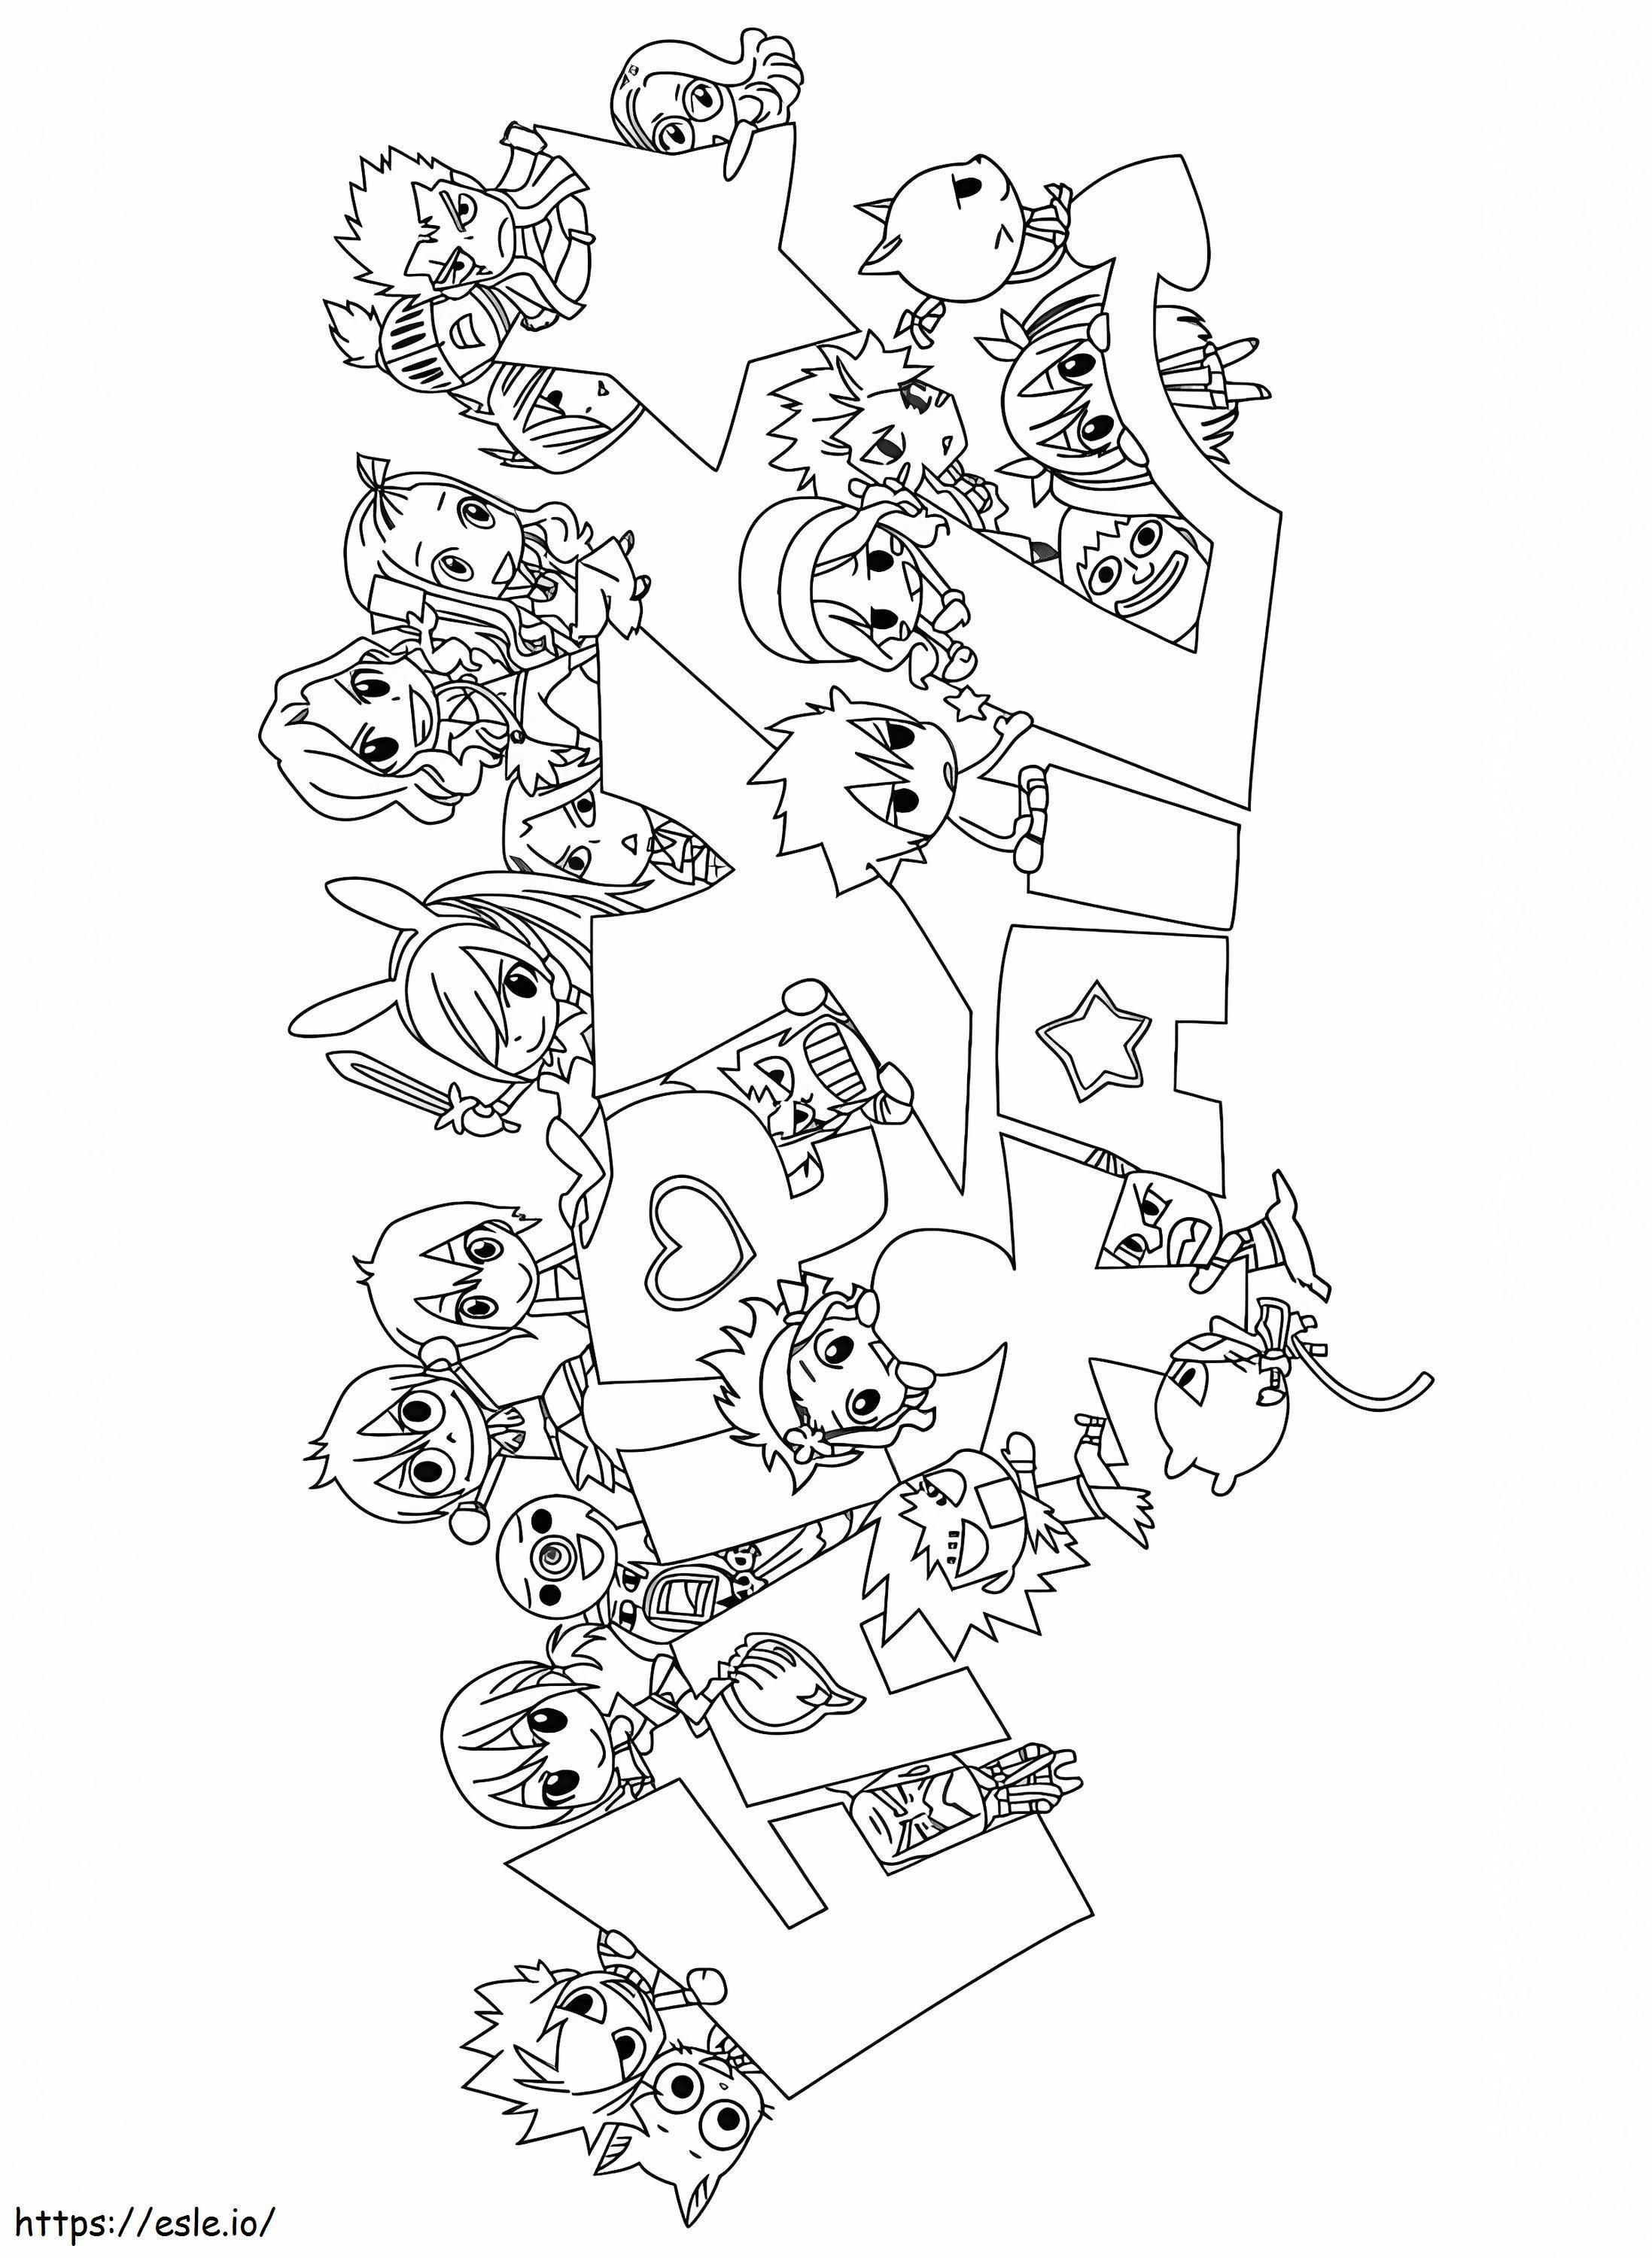 26Fairy Tail Team Chibi 1 coloring page